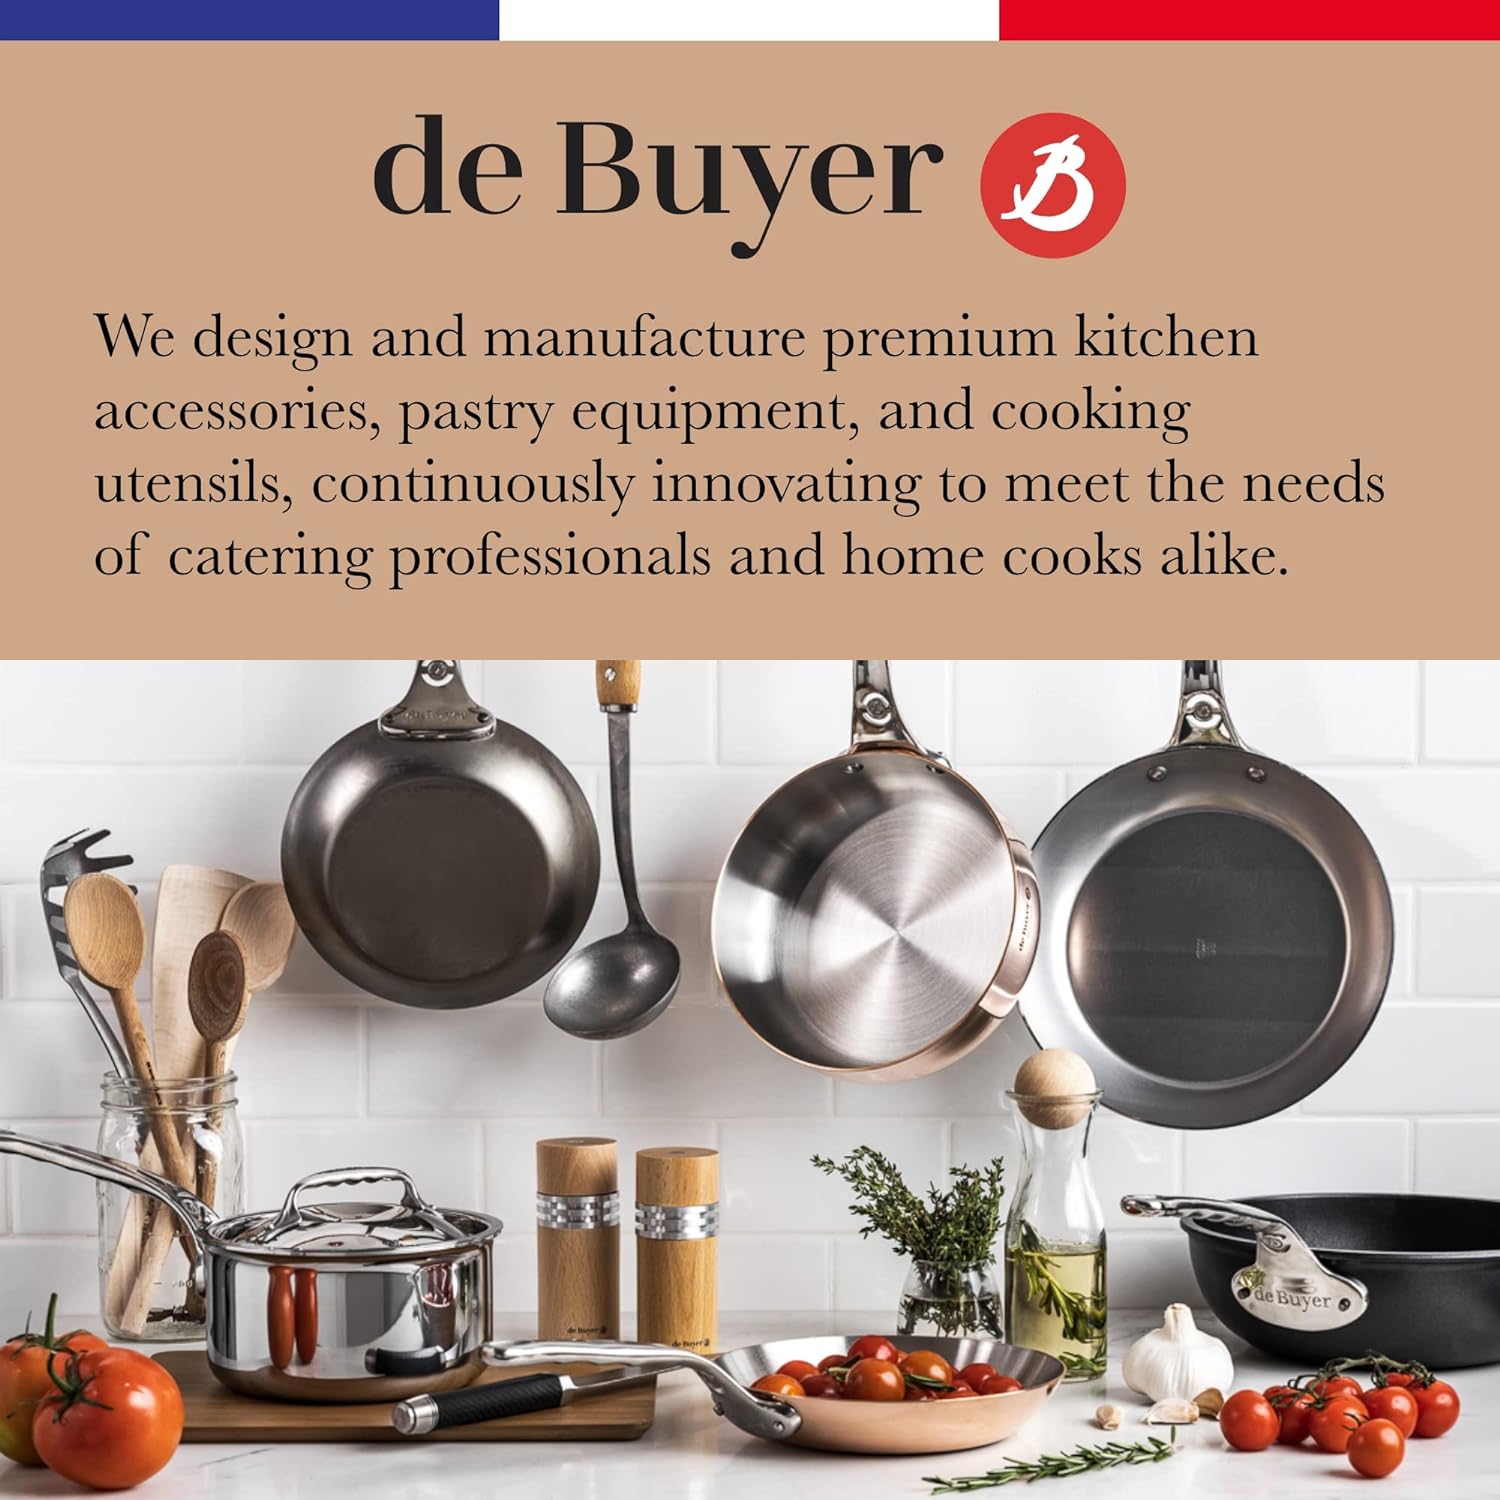 de Buyer MINERAL B Carbon Steel Fry Pan - 8” - Ideal for Searing, Sauteing  Reheating - Naturally Nonstick - Made in France